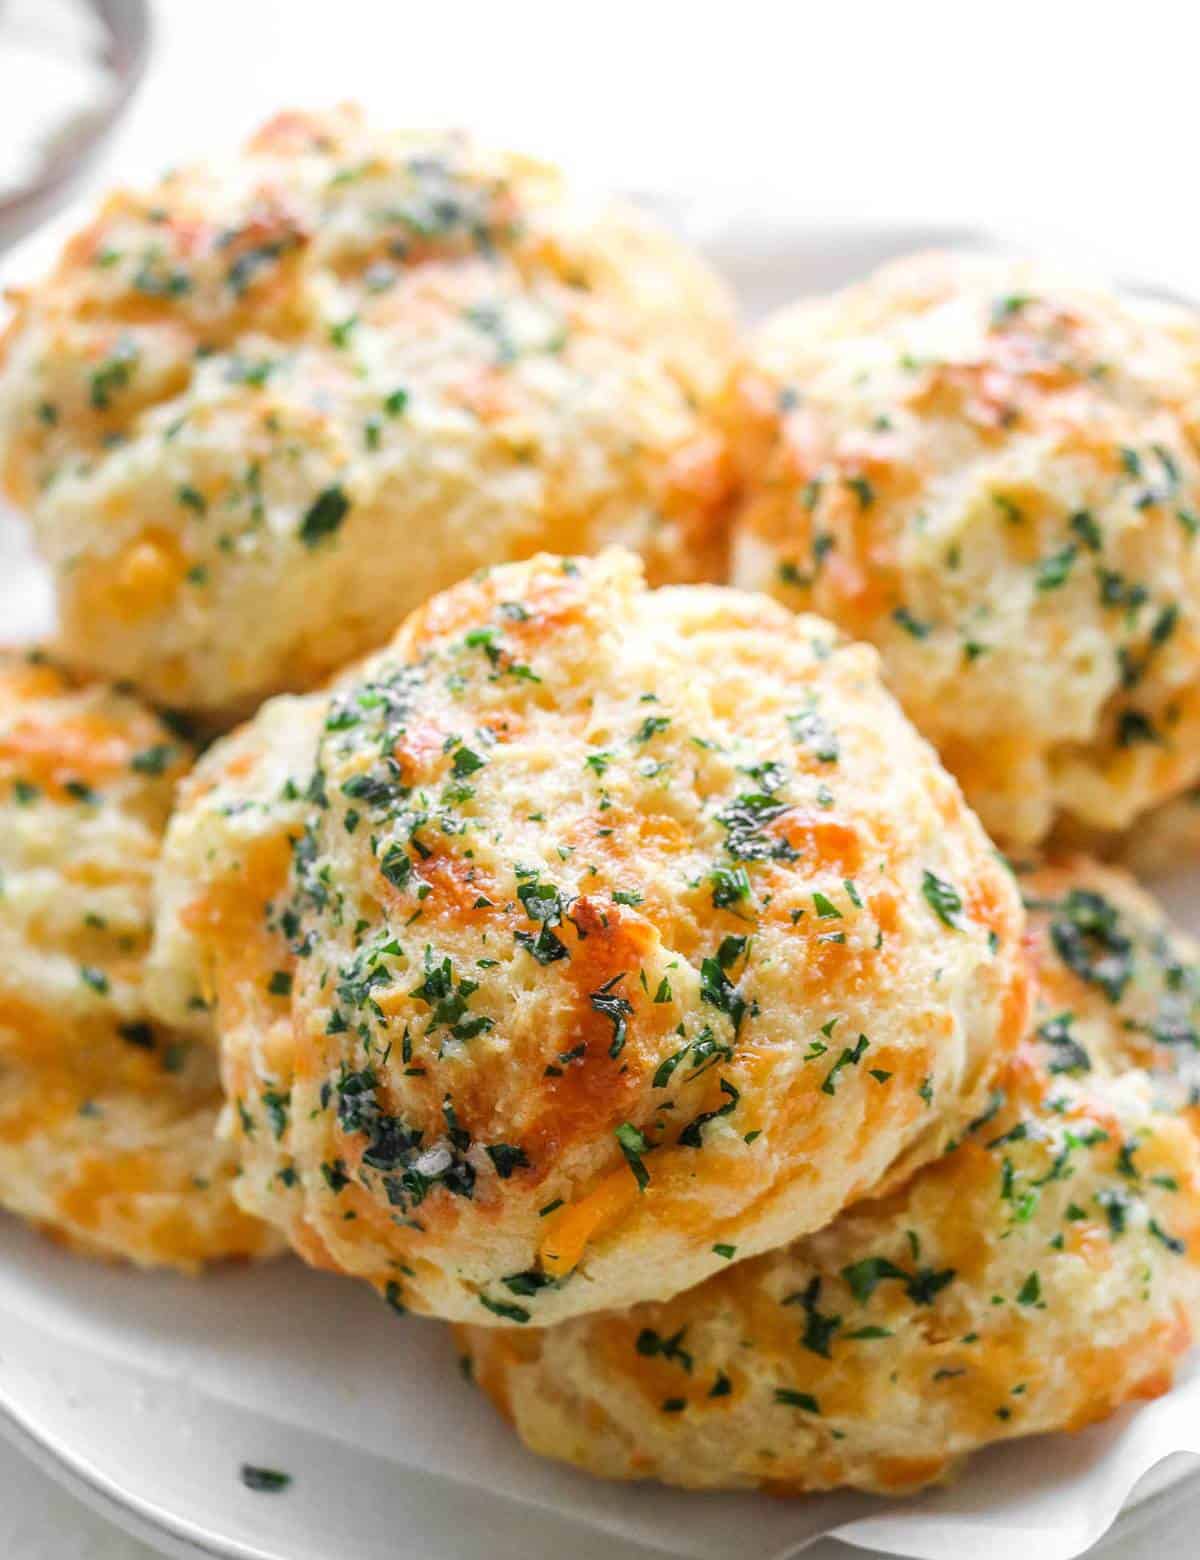 https://www.thechunkychef.com/wp-content/uploads/2021/04/Copycat-Cheddar-Bay-Biscuits-feat.jpg